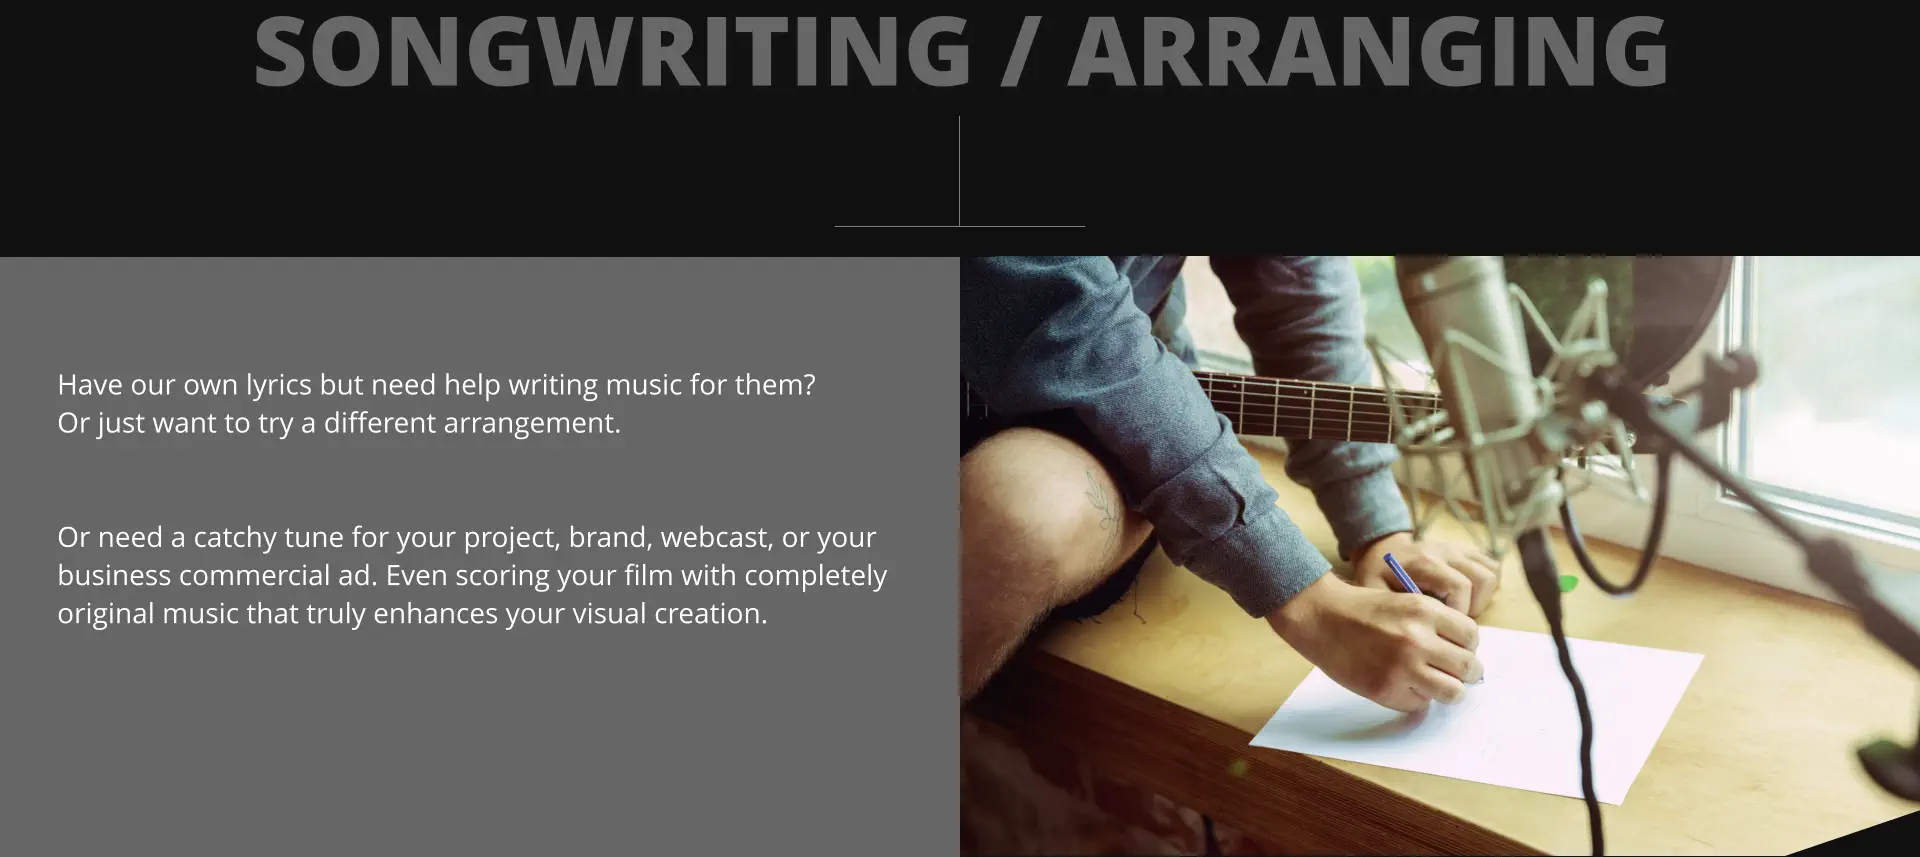 SONGWRITING / ARRANGING Have our own lyrics but need help writing music for them?  Or just want to try a different arrangement.    Or need a catchy tune for your project, brand, webcast, or your  business commercial ad. Even scoring your film with completely original music that truly enhances your visual creation.